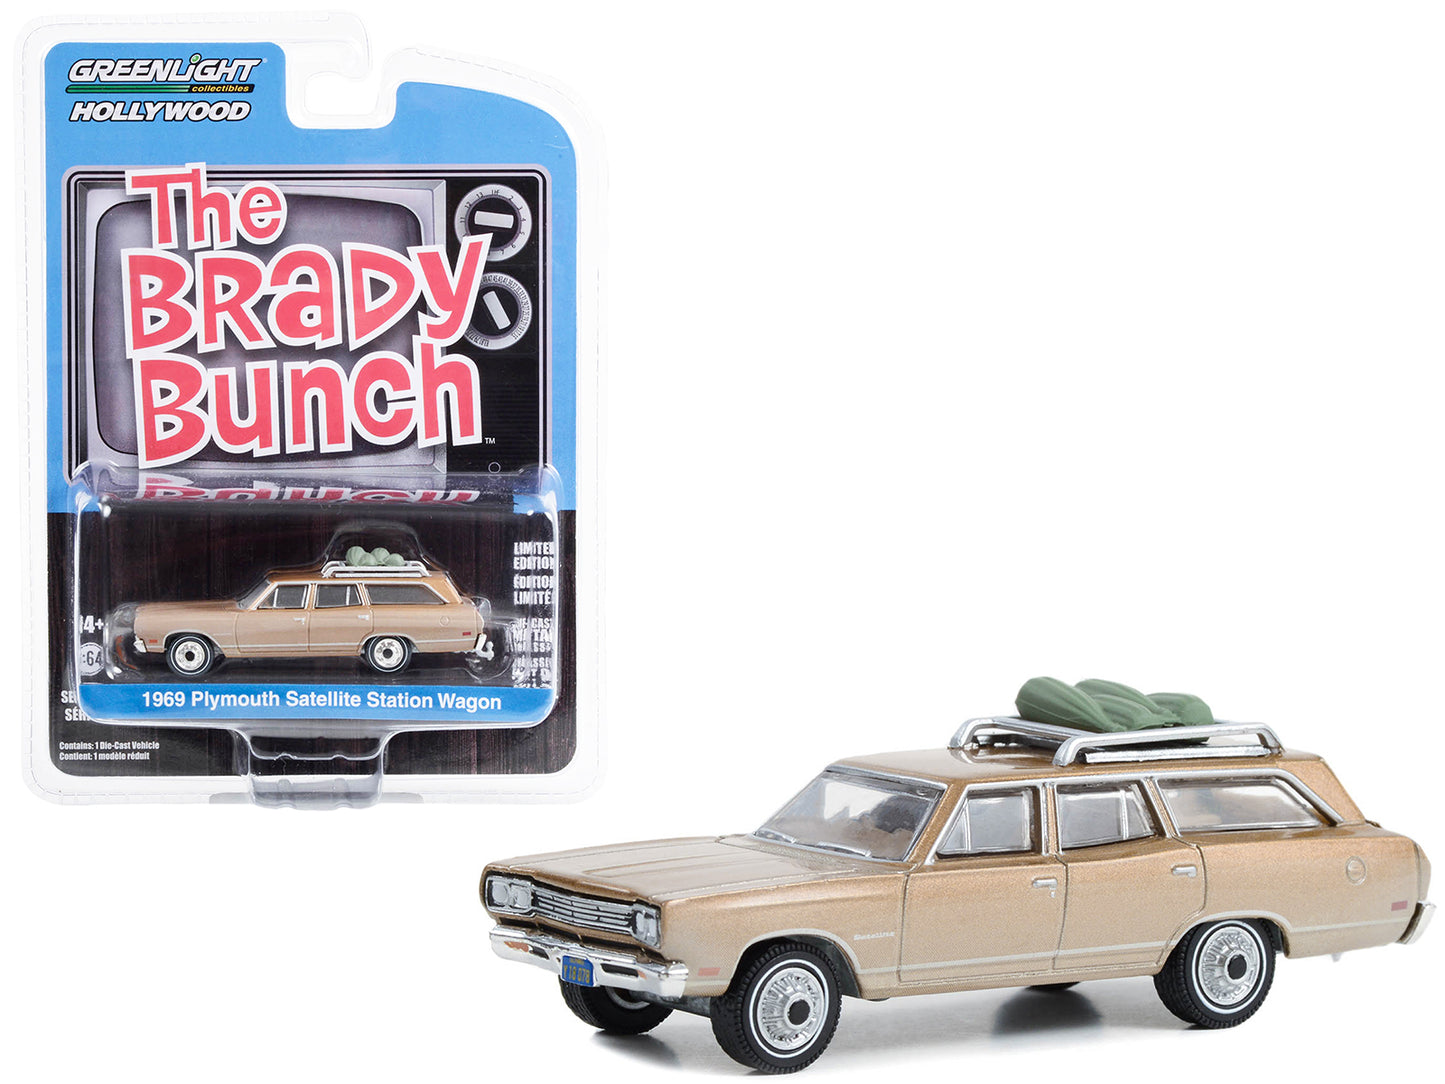 1969 Plymouth Satellite Station Wagon Gold Metallic with Rooftop Camping Equipment (Dirty Version) "The Brady Bunch" (1969-1974) TV Series "Hollywood Series" Release 39 1/64 Diecast Model Car by Greenlight